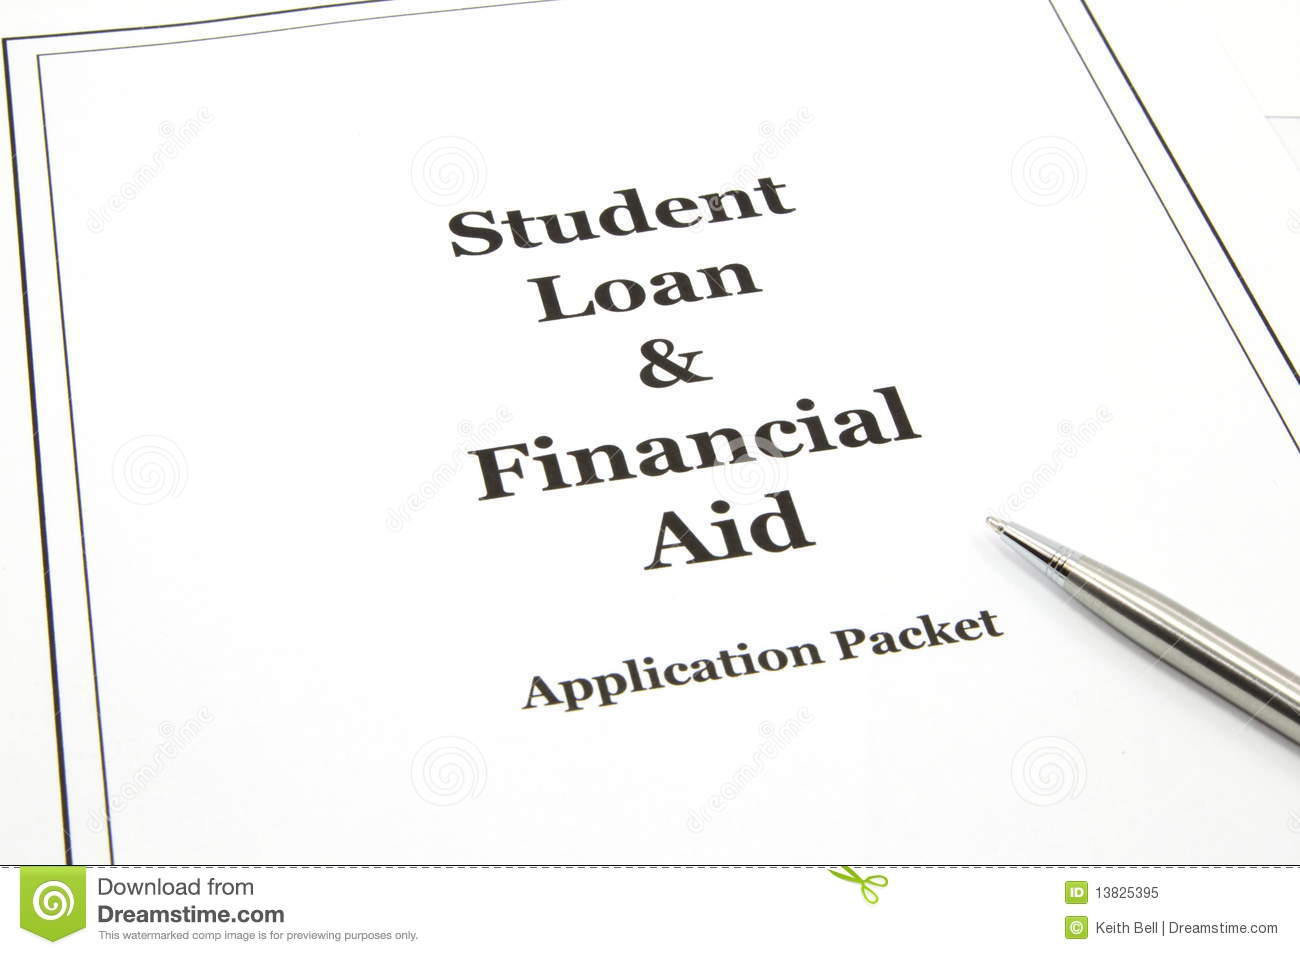 Student Loan And Financial Aid Application Packet Royalty Free Stock    